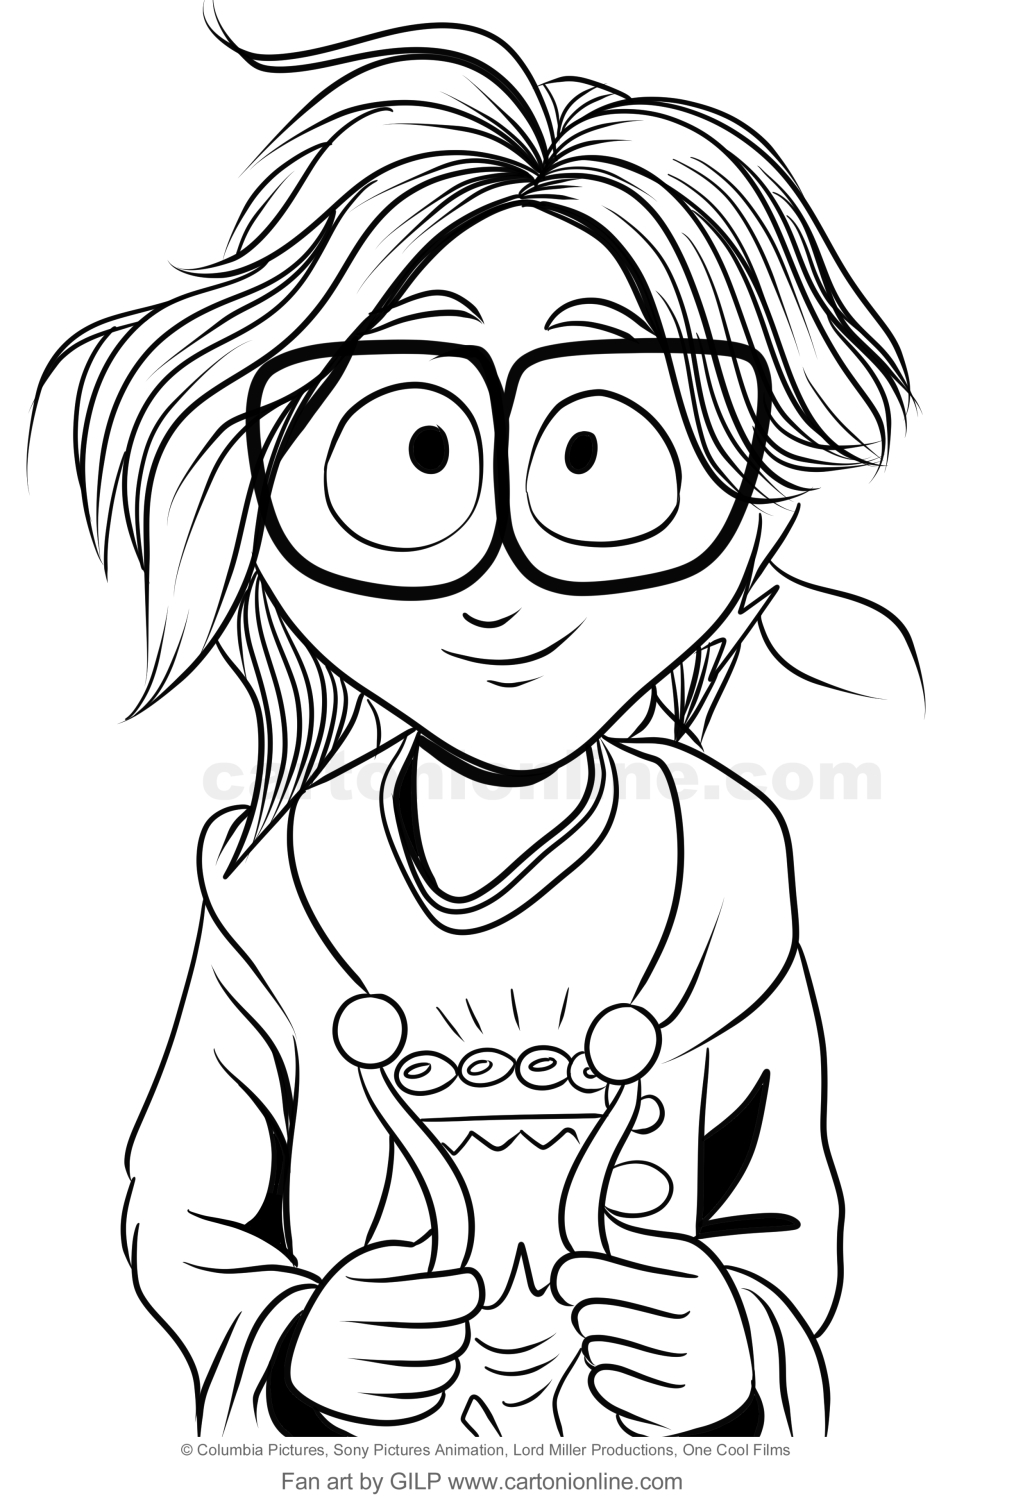 Katie Mitchell Mitchellowie kontra maszyny coloring page to print and coloring